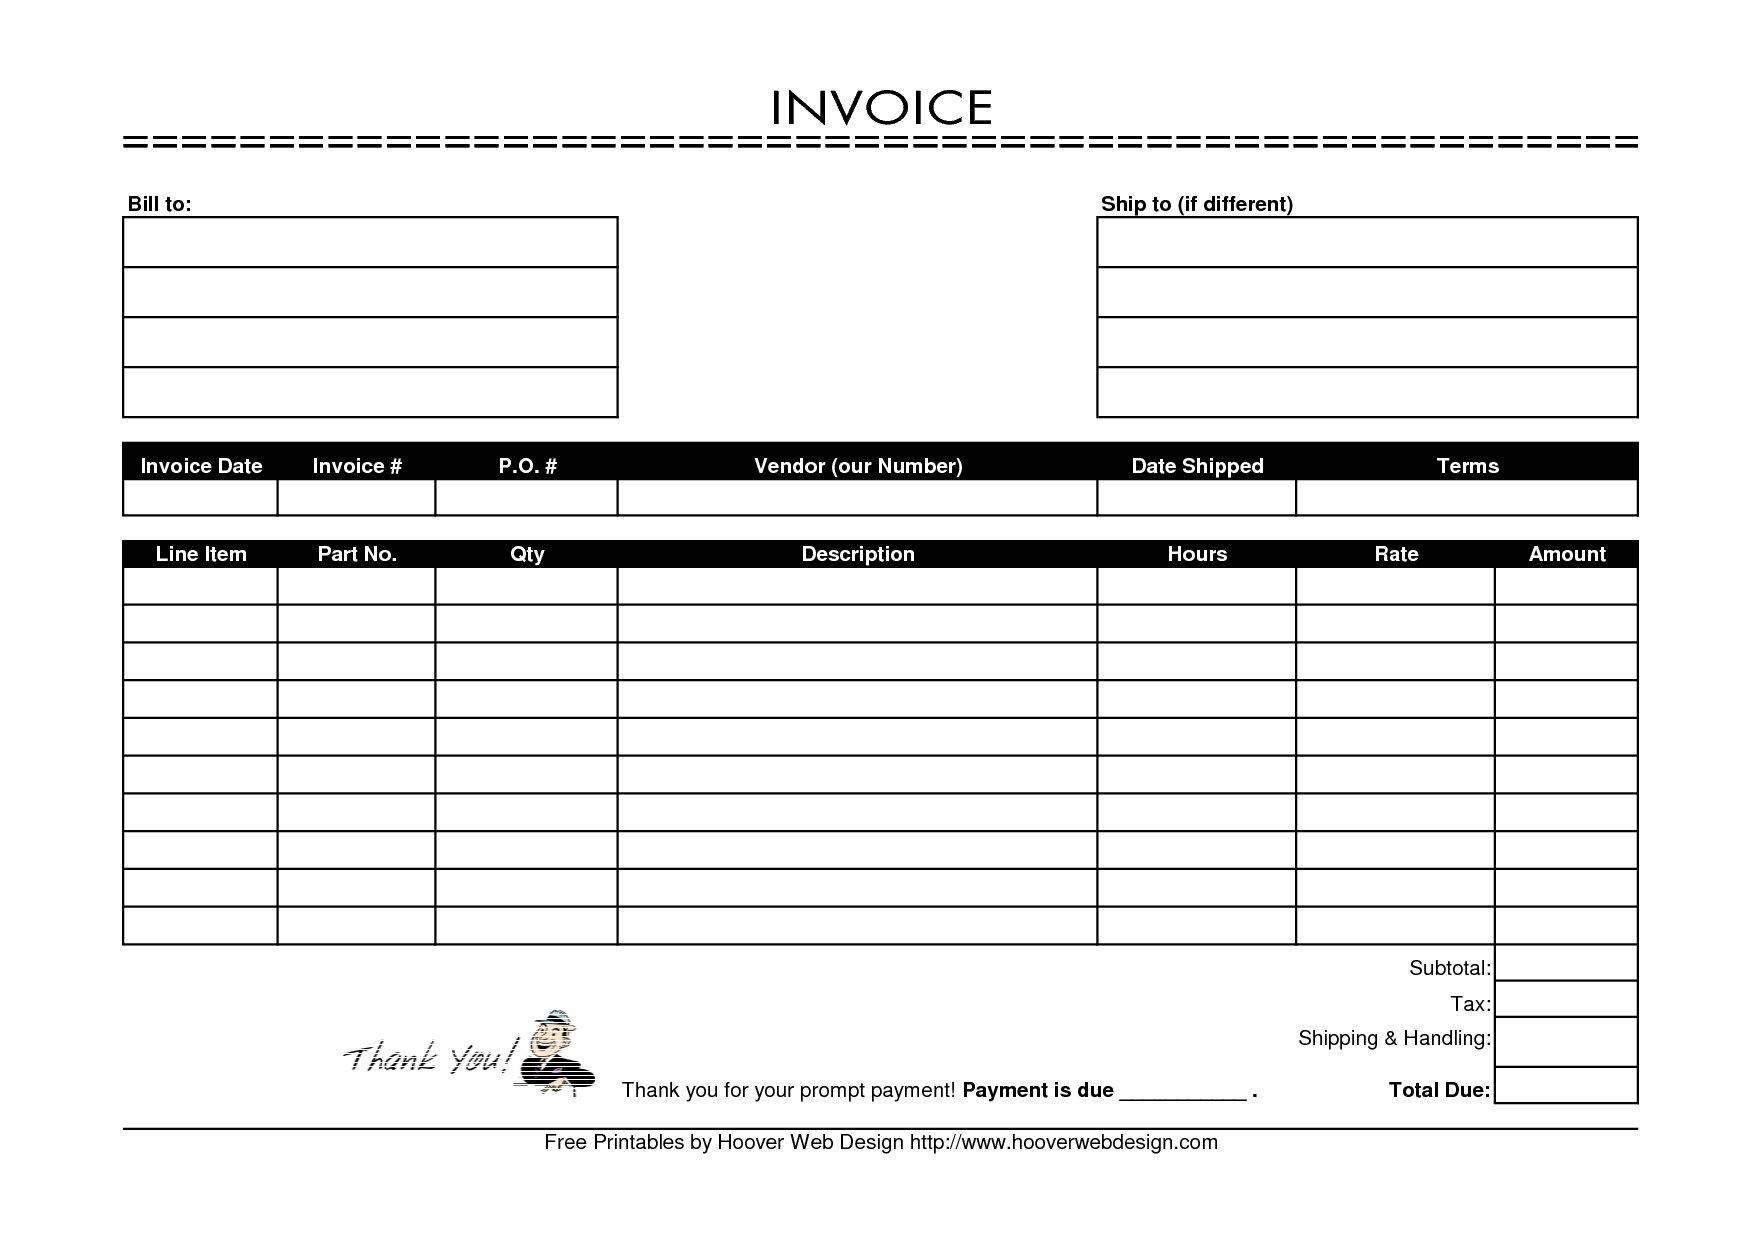 create invoices free free printable invoice template 9 examples of printable invoice 1754 X 1240